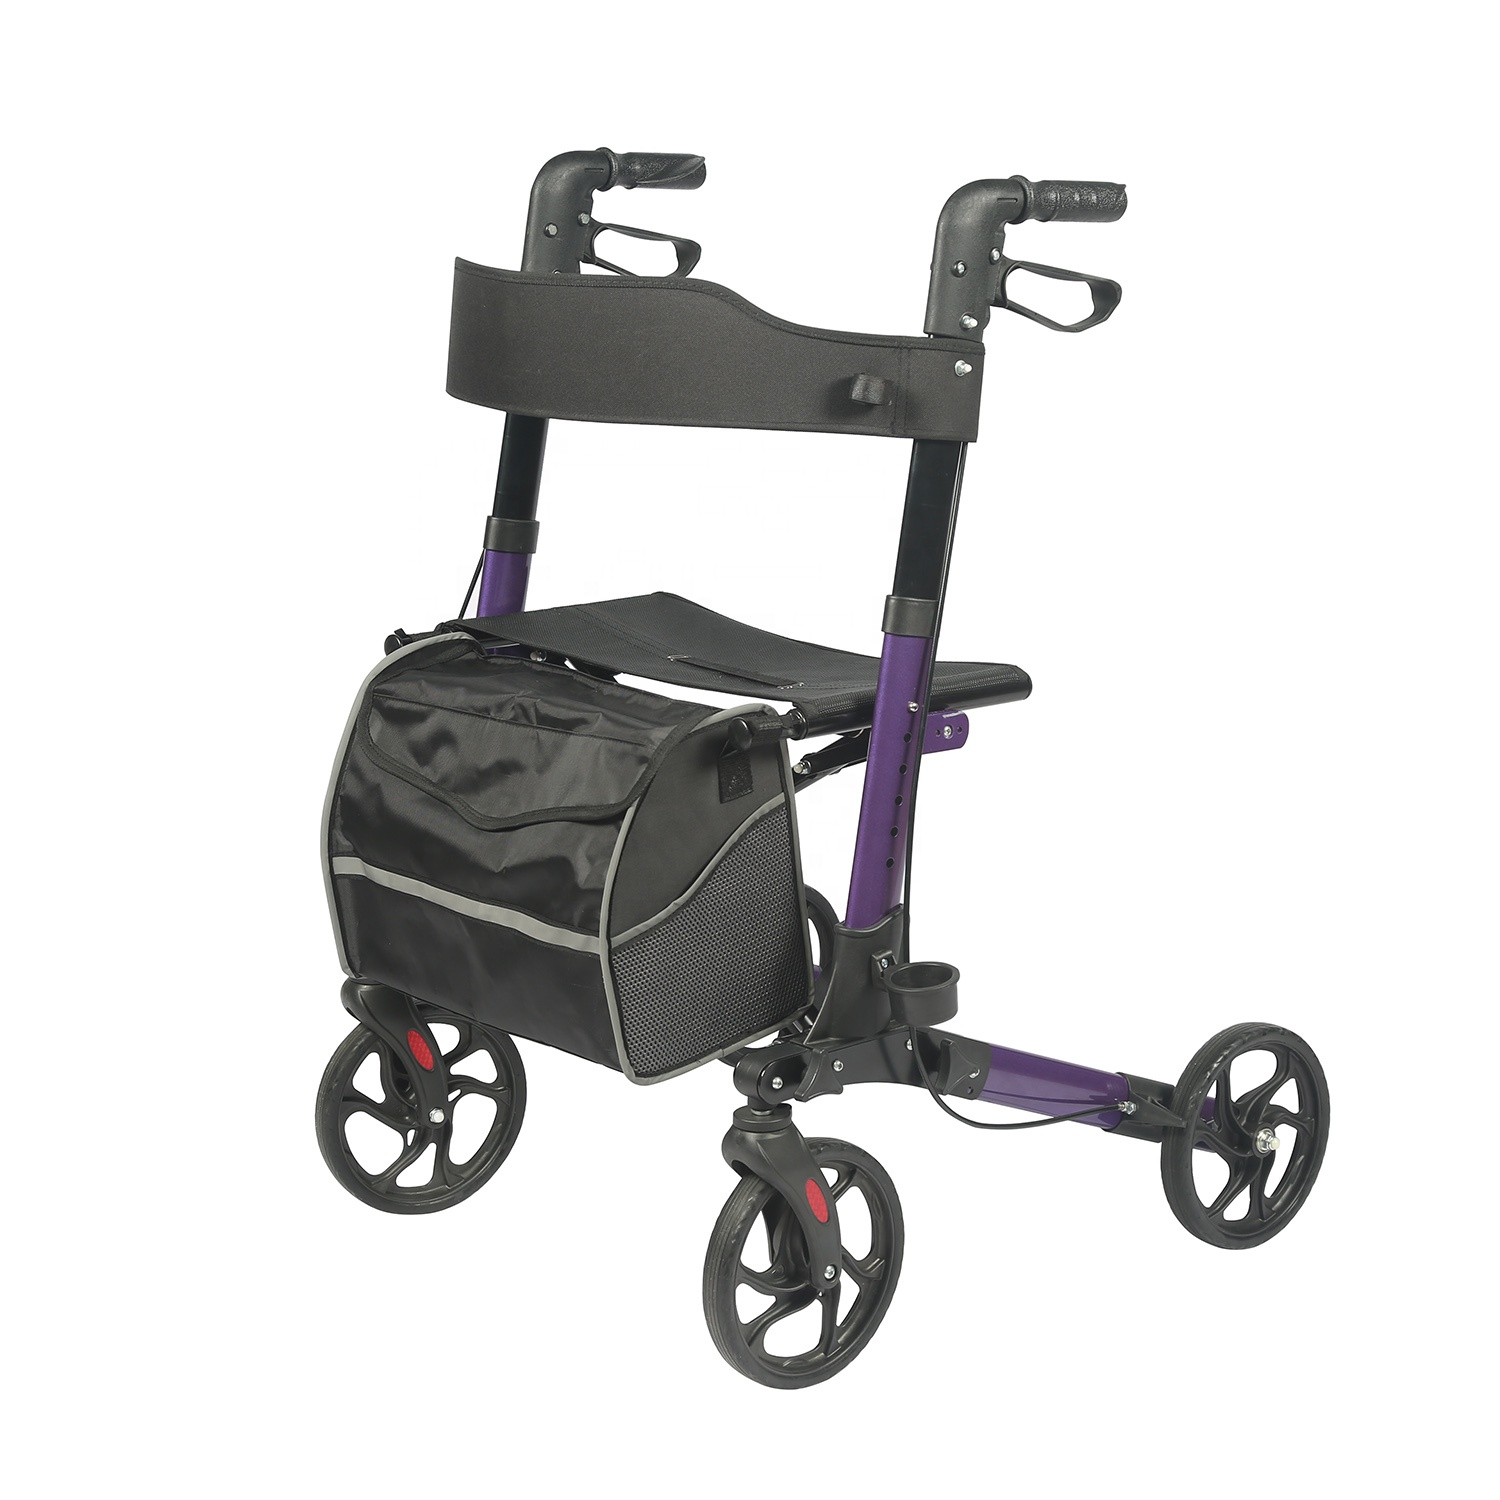 Aluminum Rollator Walker with Seat and Wheels, Lightweight & Foldable, Rolling Walker Supports 300Lbs for Seniors TRA01